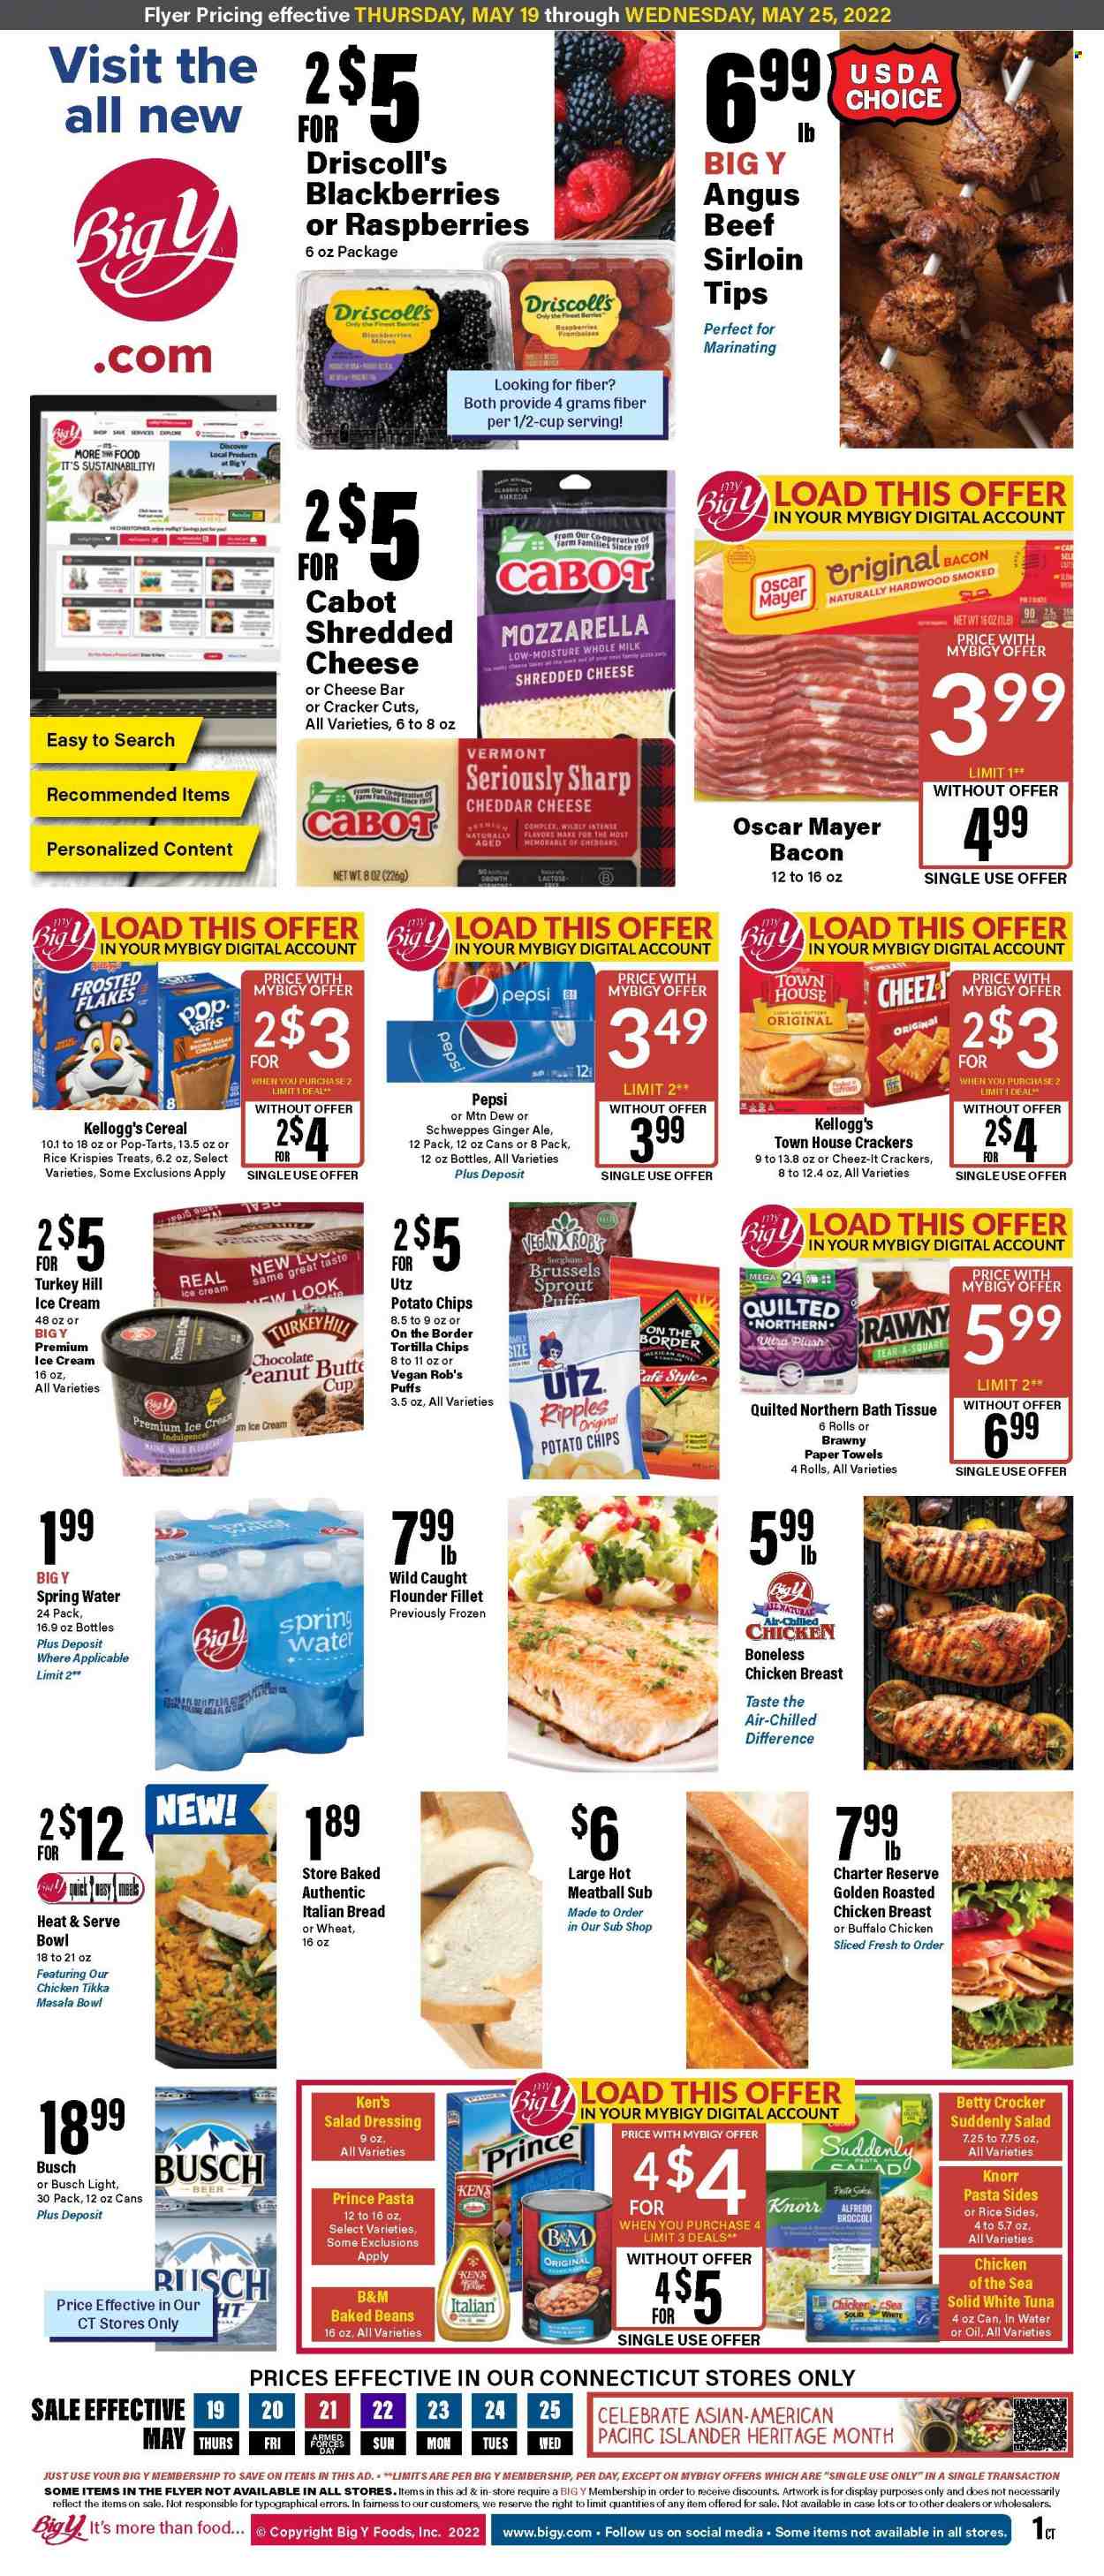 thumbnail - Big Y Flyer - 05/19/2022 - 05/25/2022 - Sales products - bread, pie, puffs, beans, broccoli, brussel sprouts, blackberries, cod, flounder, tuna, pizza, chicken roast, Knorr, Tikka Masala, pasta sides, bacon, Oscar Mayer, shredded cheese, milk, ice cream, crackers, Kellogg's, Pop-Tarts, tortilla chips, potato chips, Cheez-It, baked beans, cereals, Rice Krispies, Frosted Flakes, salad dressing, dressing, ginger ale, Mountain Dew, Schweppes, Pepsi, spring water, beer, Busch, chicken breasts. Page 1.